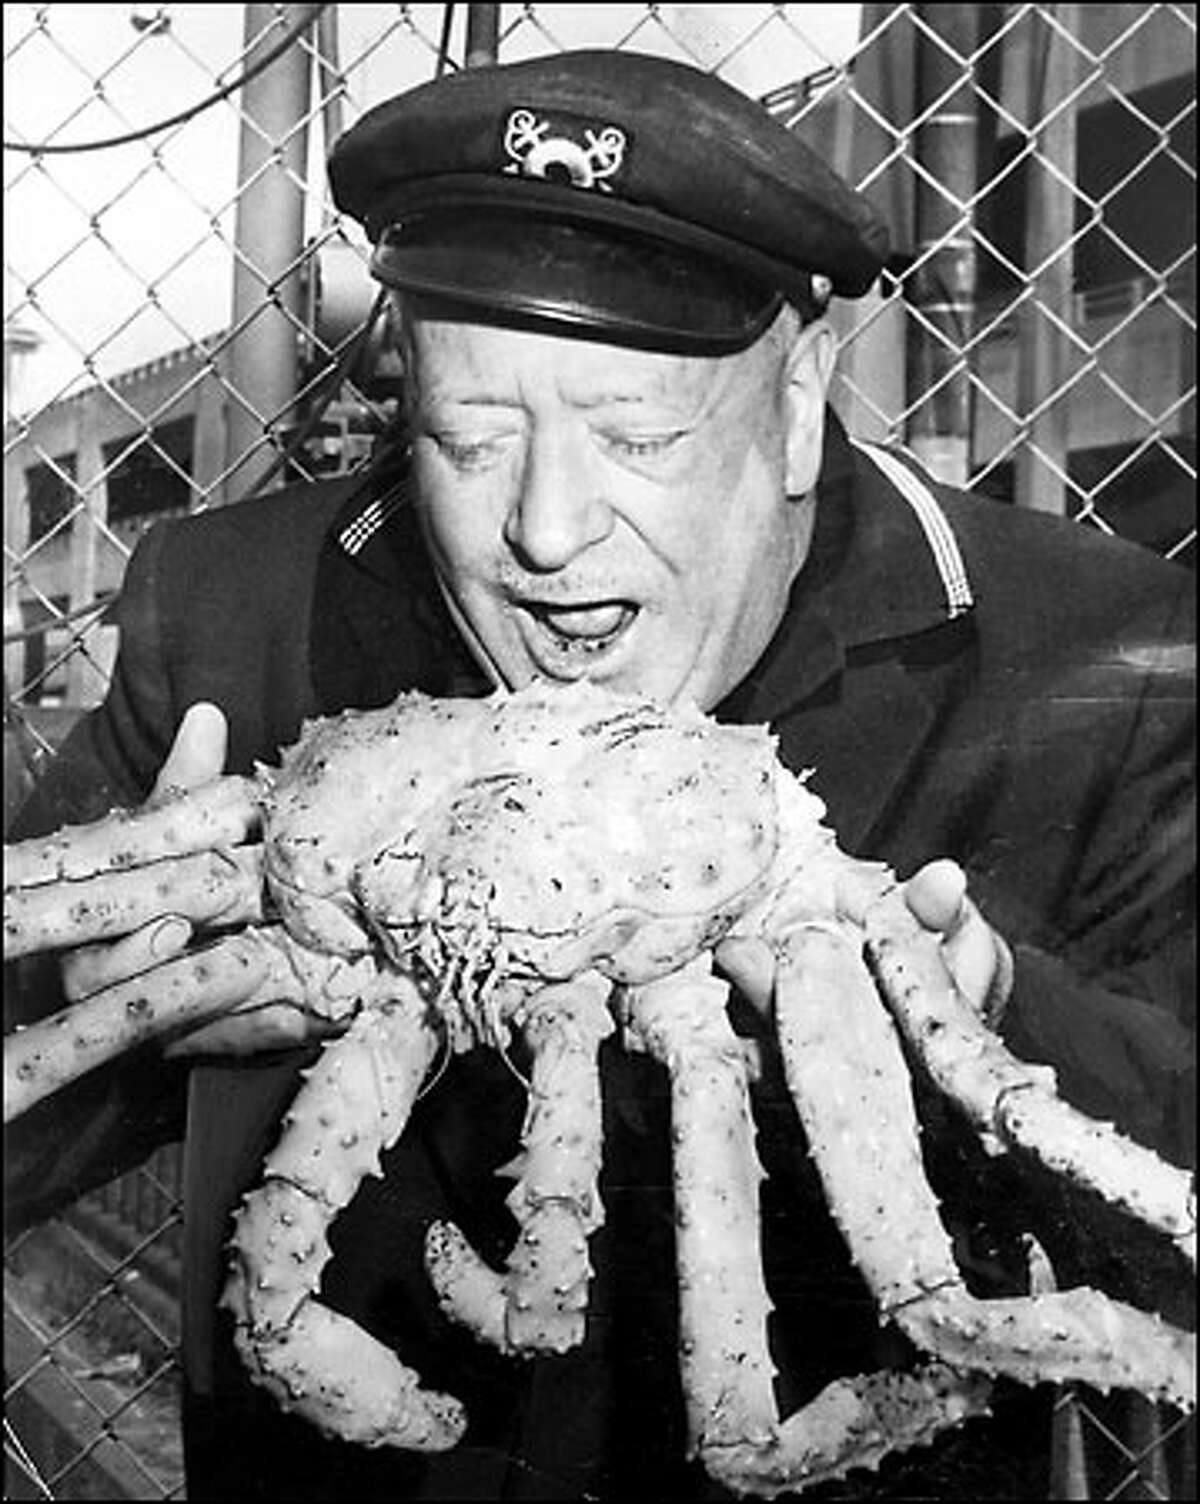 Ivar Haglund and King Crab, 1964: Longtime restaurateur and Seattle folk legend Ivar Haglund opened his first fish-and-chips stand in 1938 on the Seattle waterfront. Haglund eventually built a restaurant chain that still bears his name. Haglund was known for promotions and publicity stunts, but he also had a soft spot for local causes. He died in 1985 at age 79.